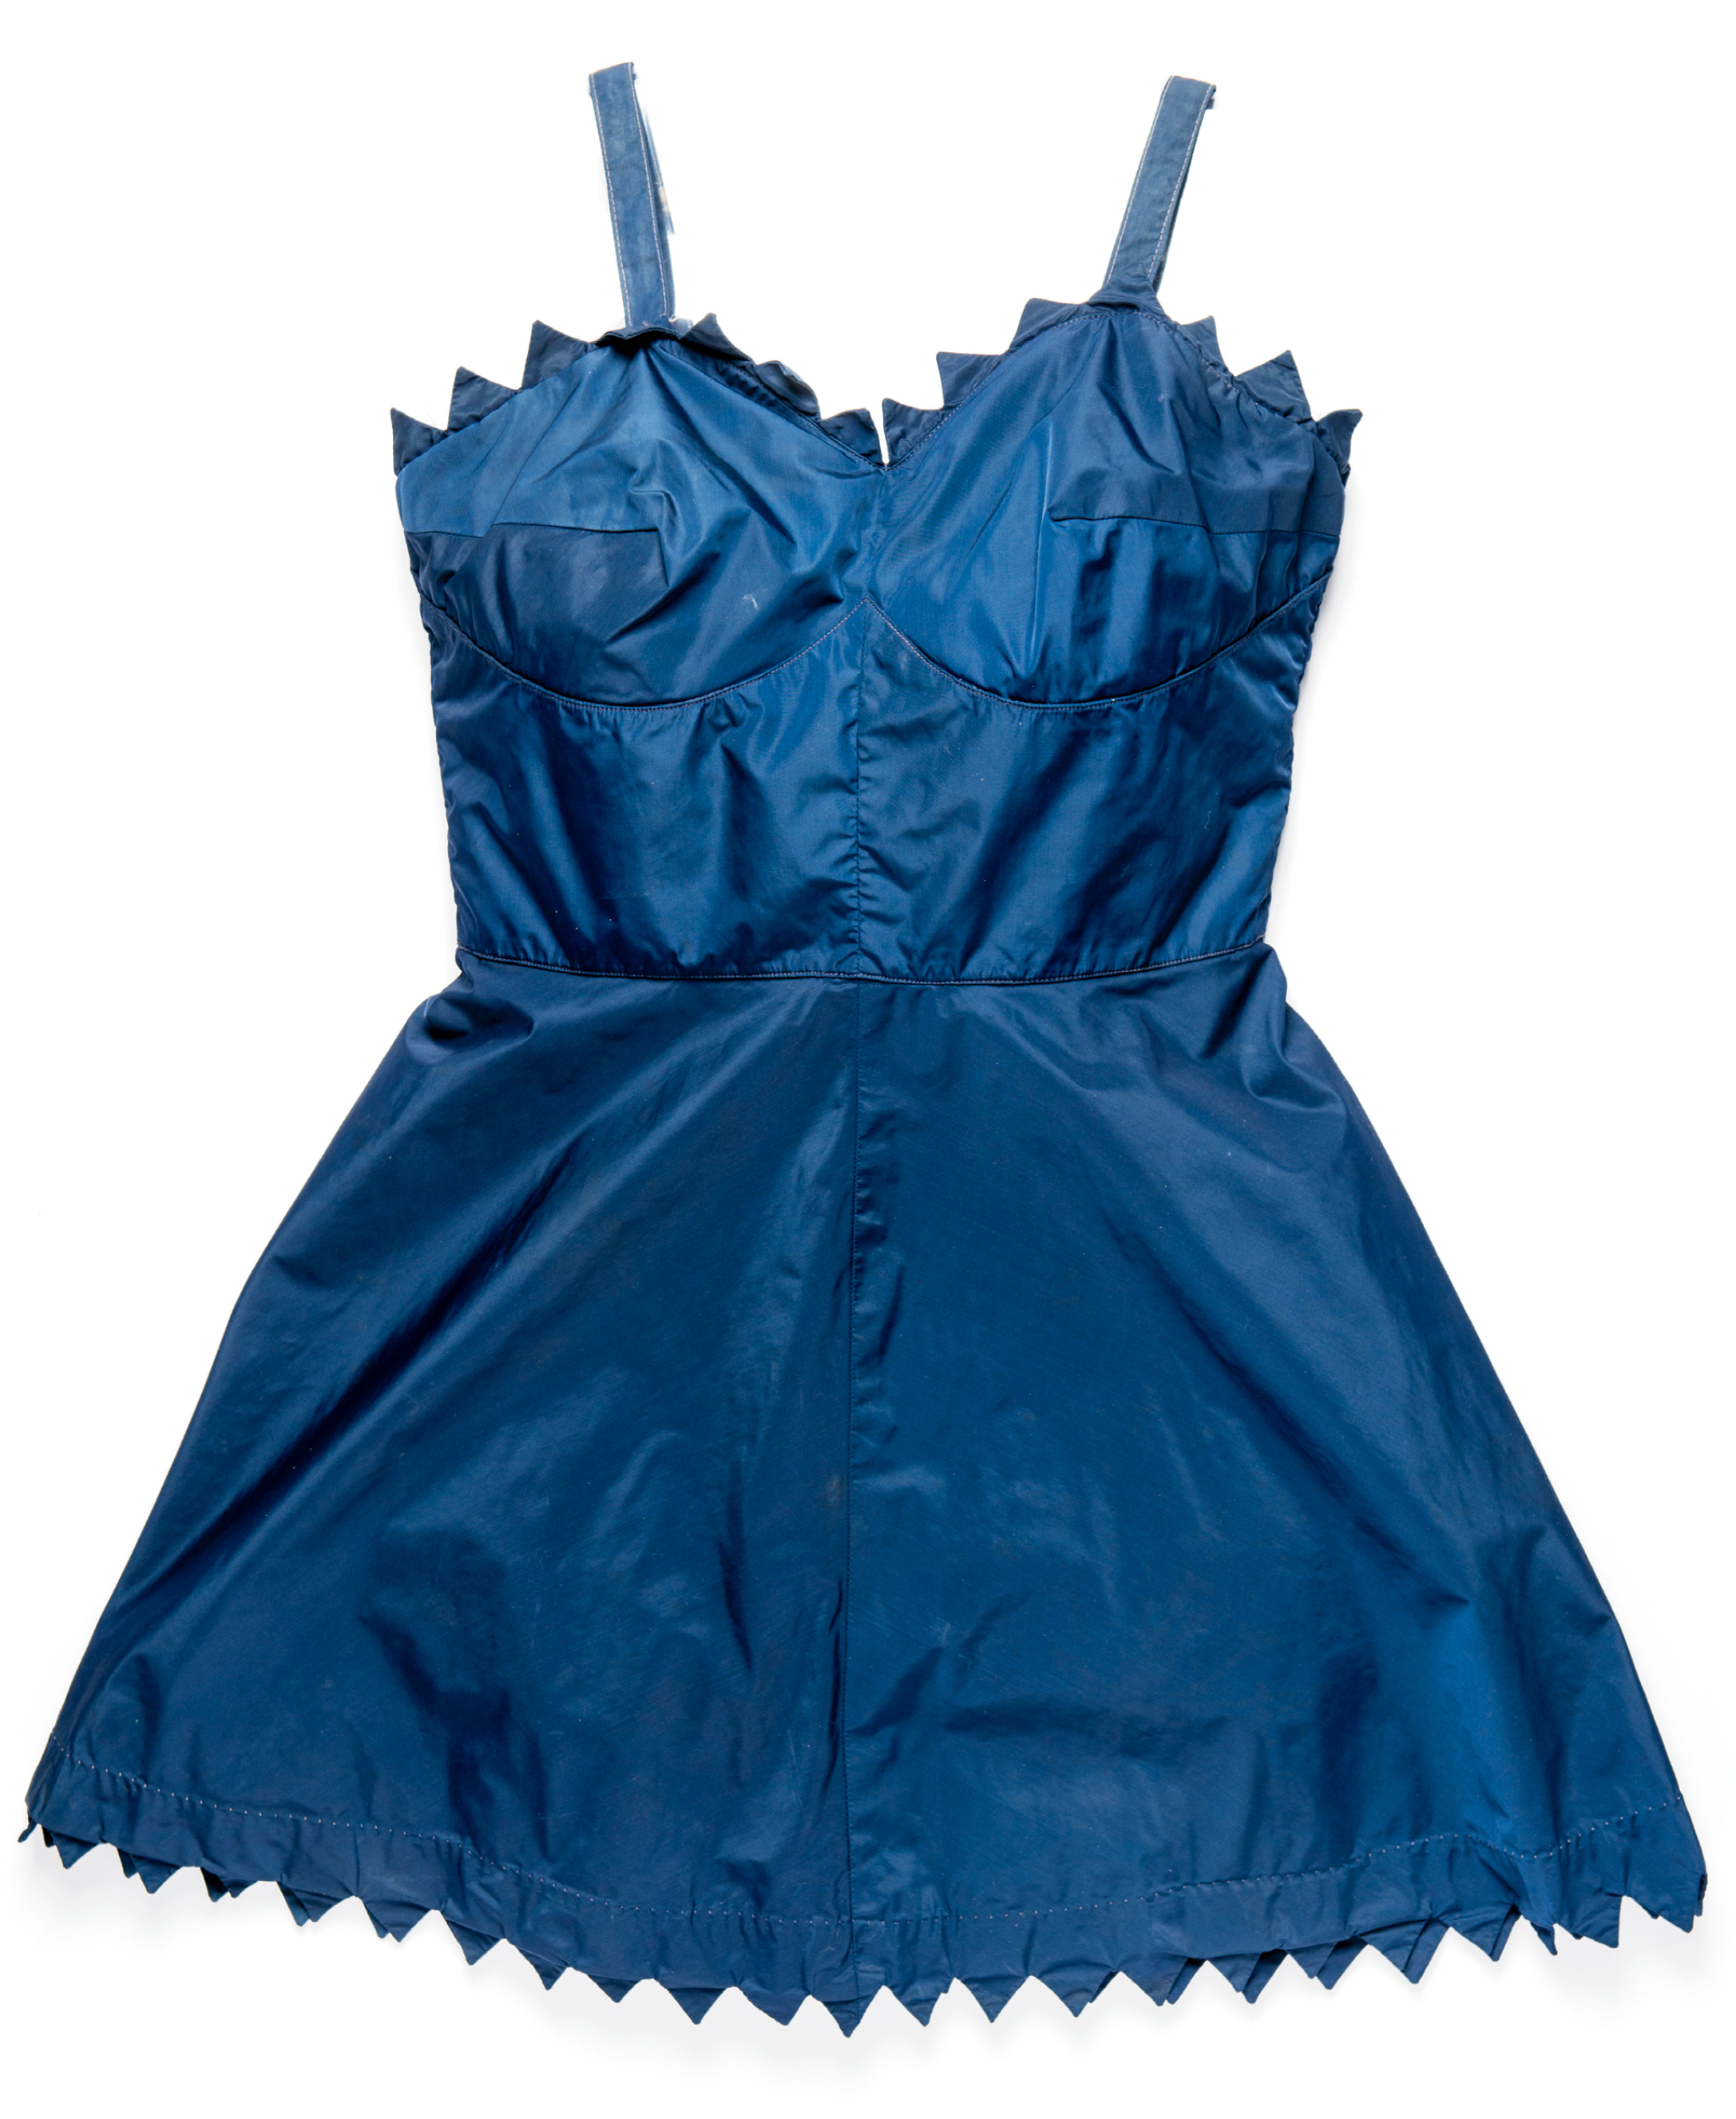 1930s - Isle of Palms and Folly Beach were awakening into hot destinations for fun in the sun and surf during the decade in which this taffeta frock debuted.